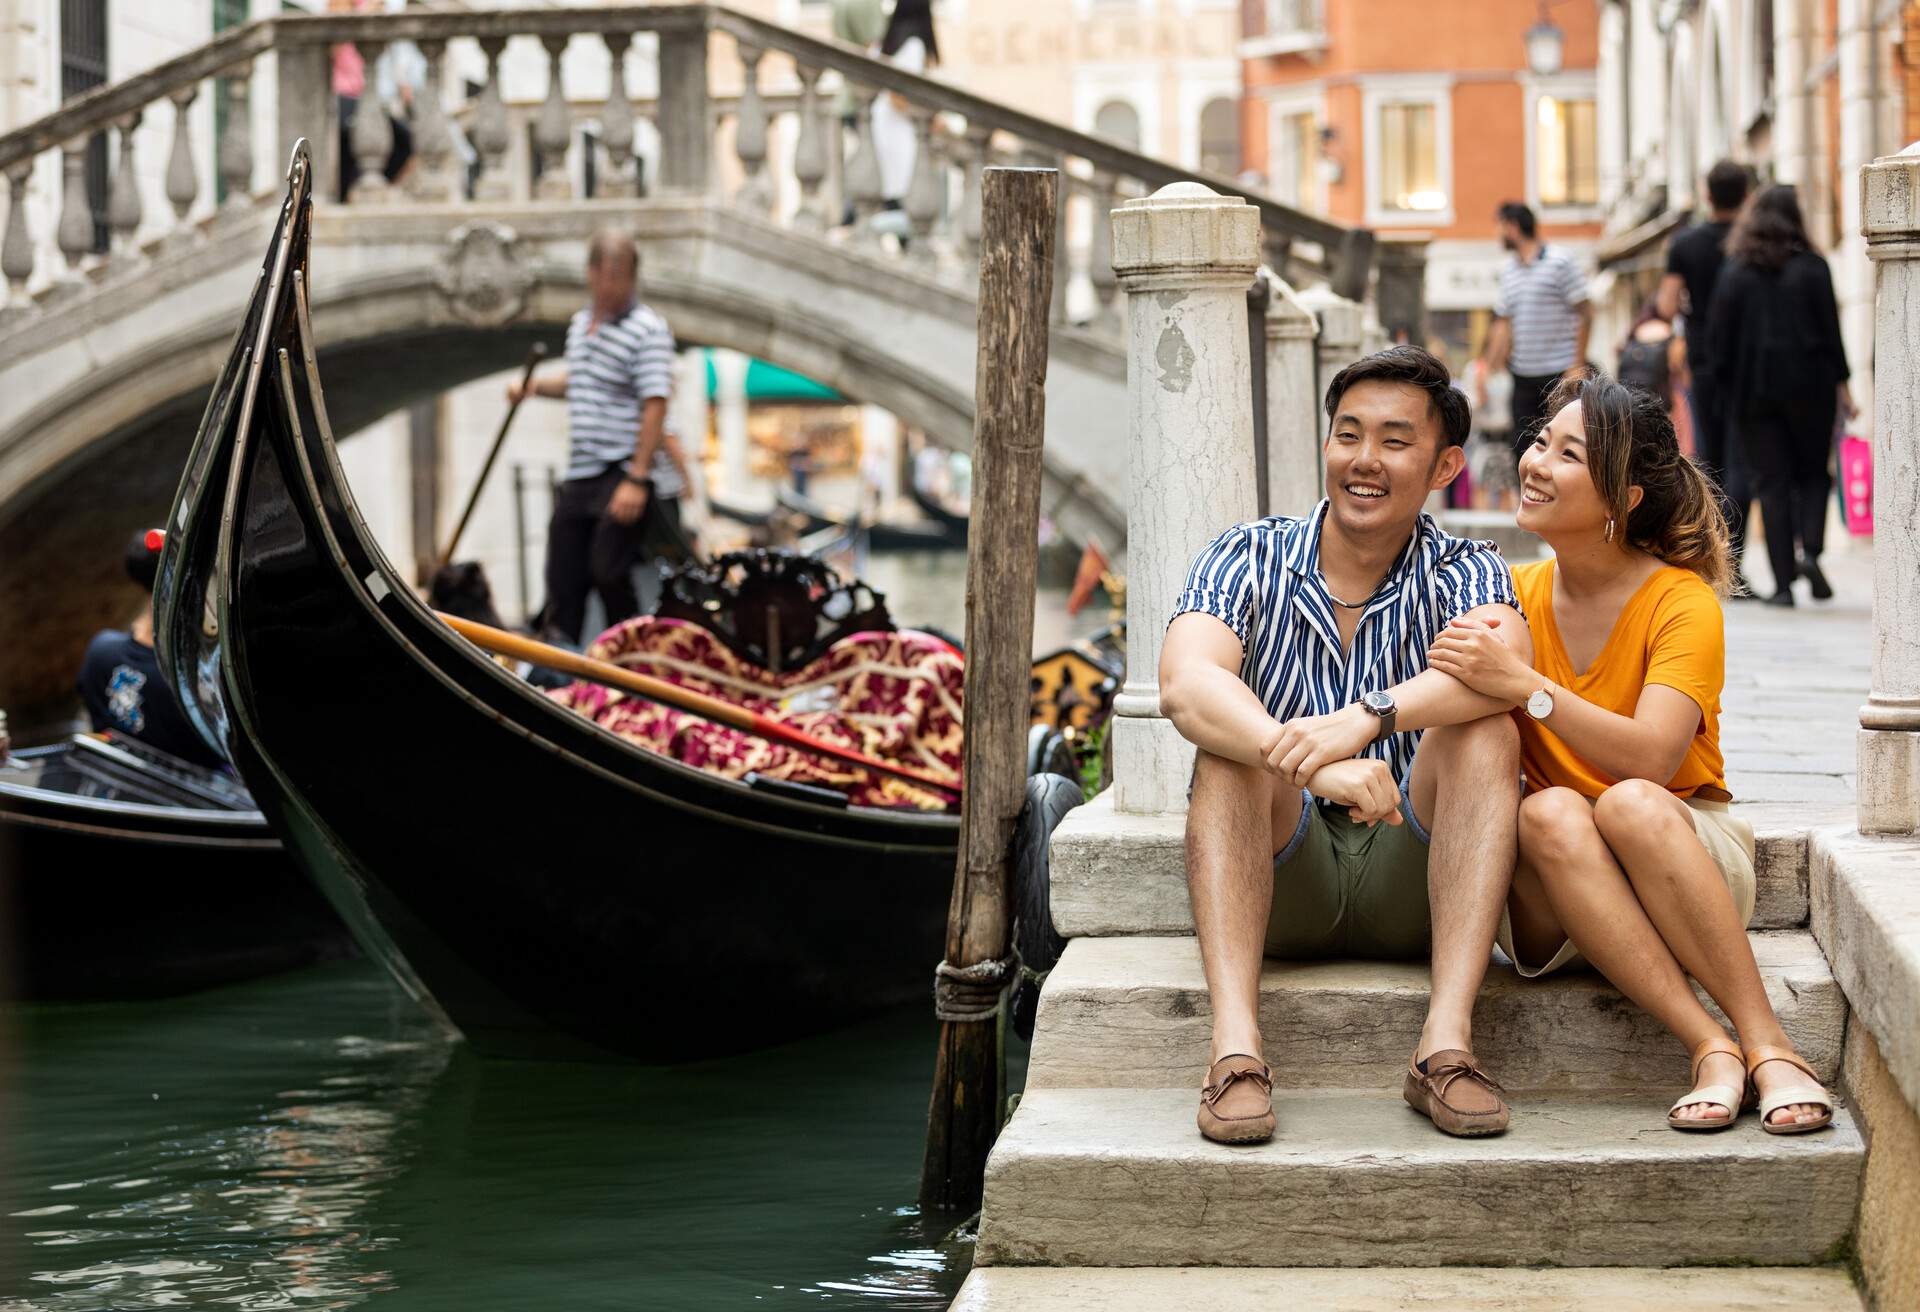 DEST_ITALY_VENICE_THEME_COUPLE_PERSON_TRAVEL_VACATION-GettyImages-1156080227